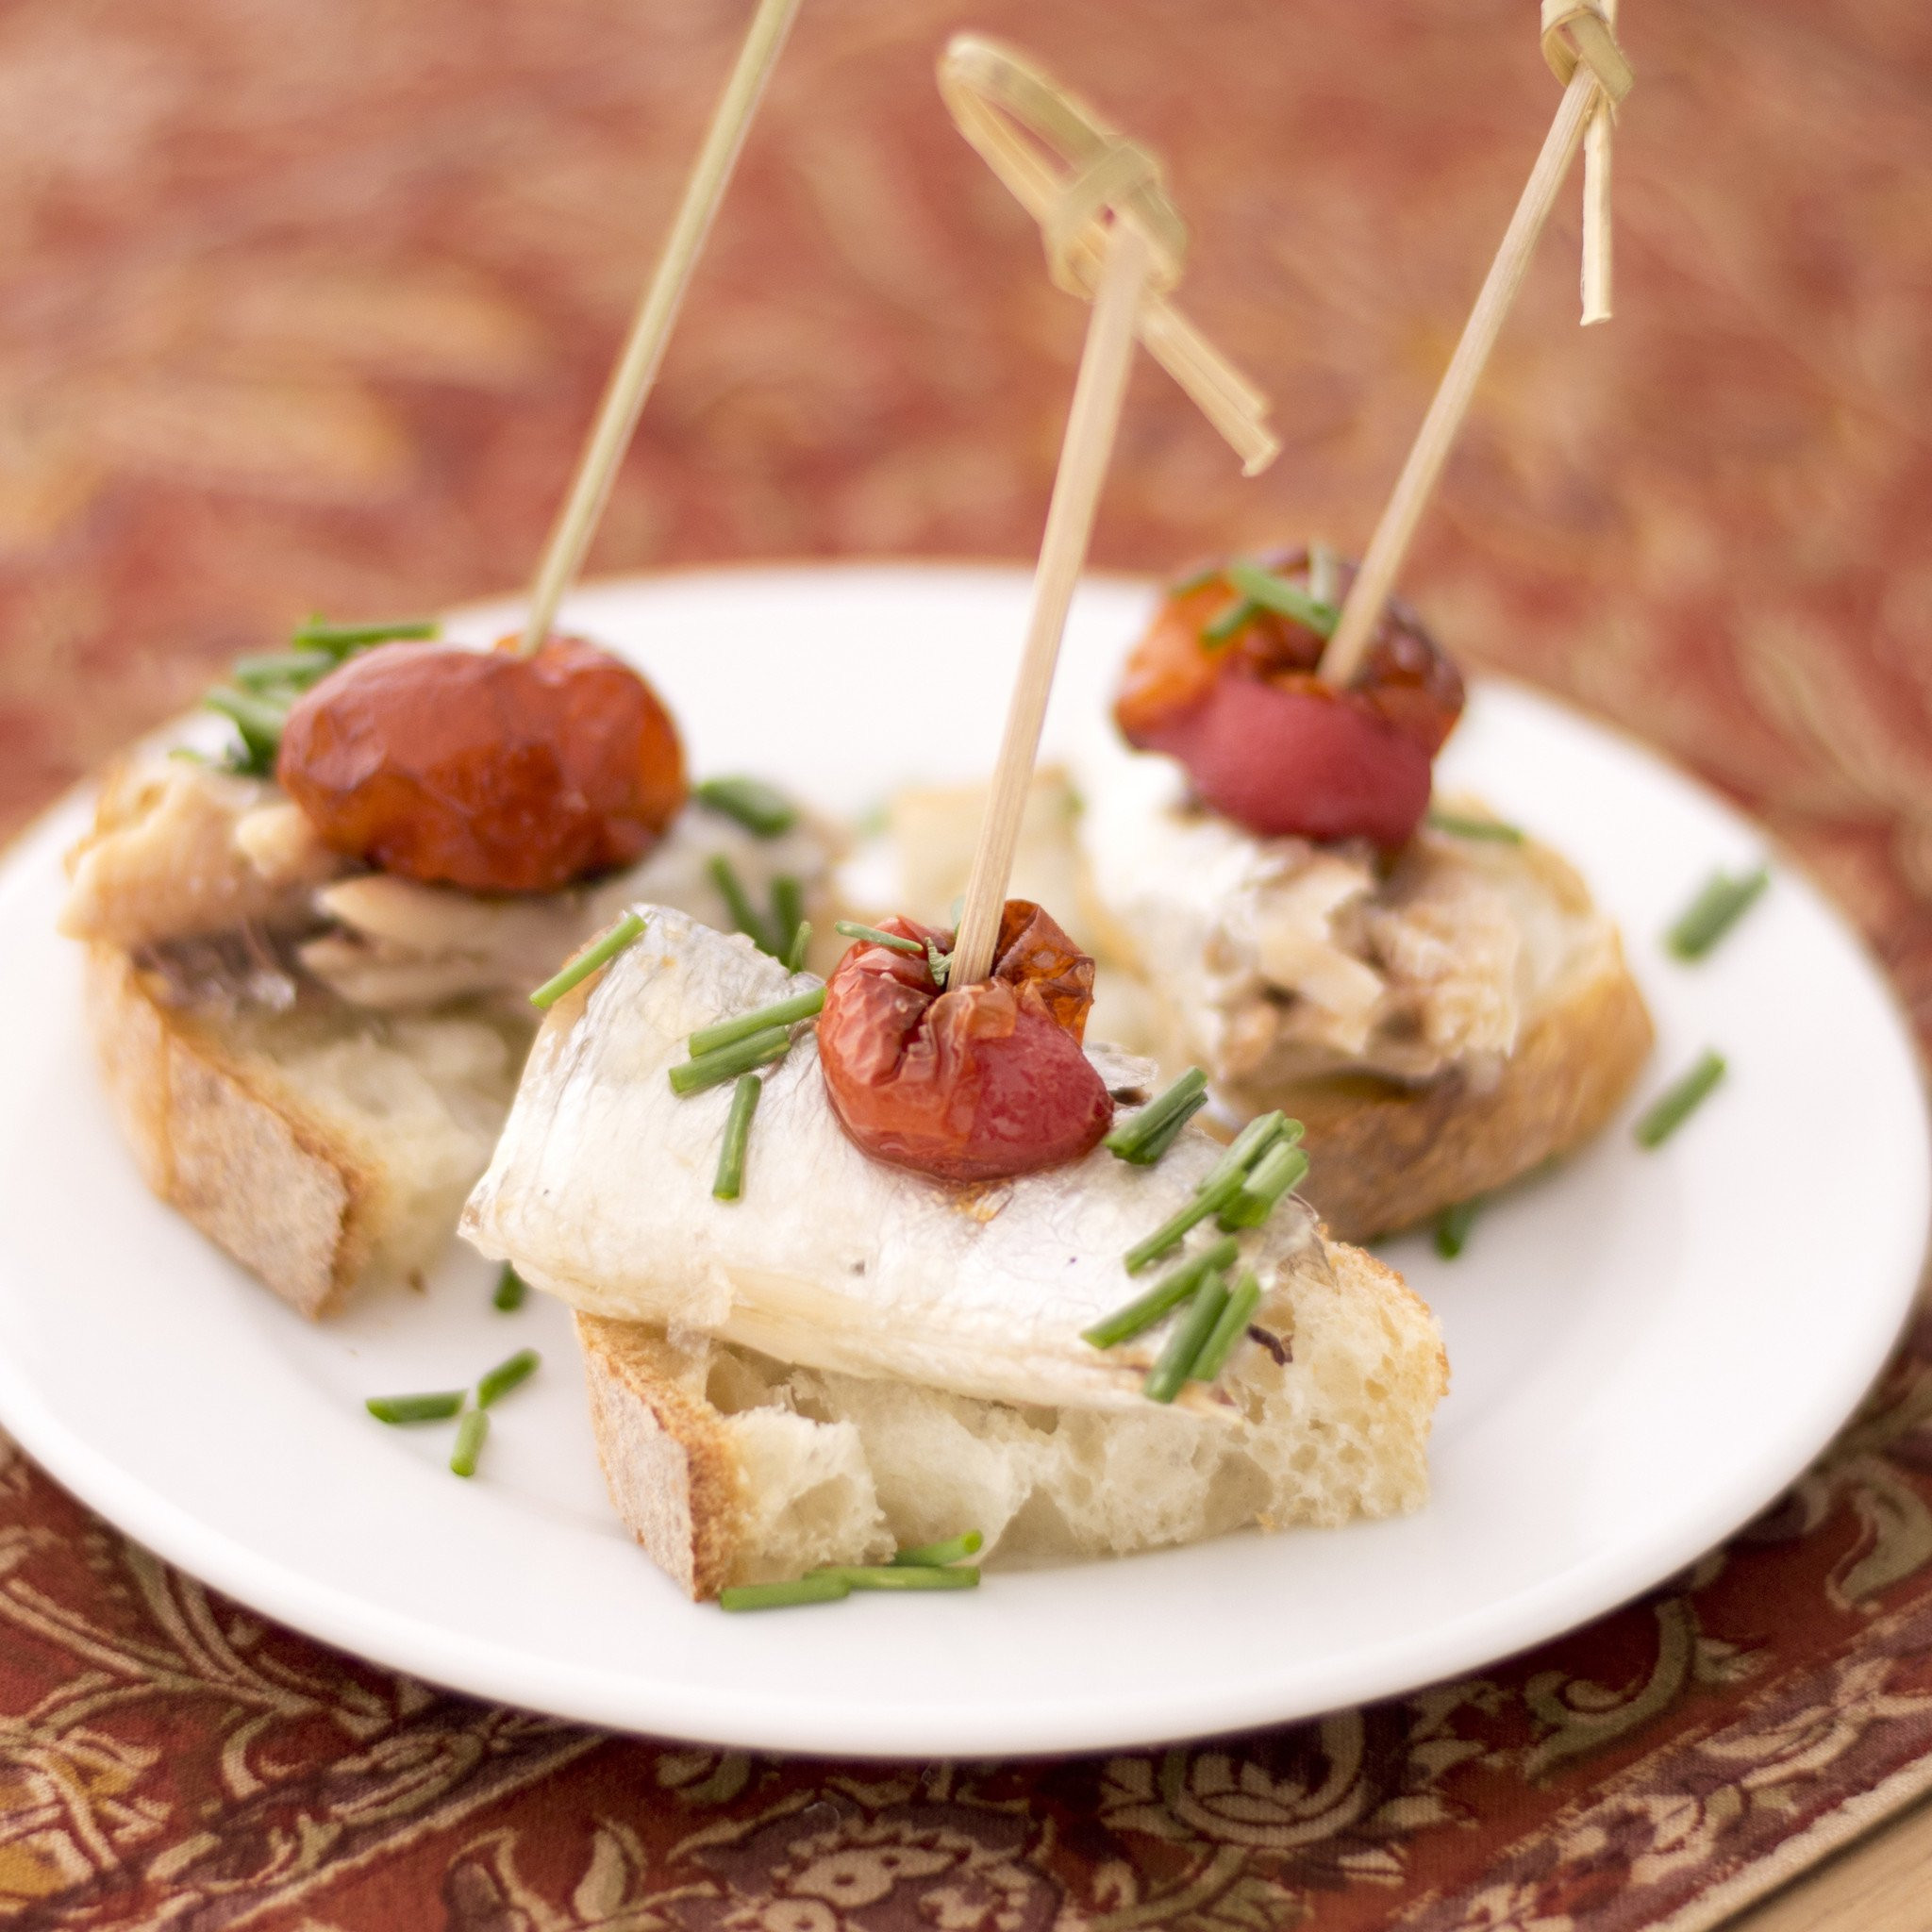 Spanish Food Ideas For A Party
 Easy 30 Minute Spanish Appetizers for a Pintxo Party